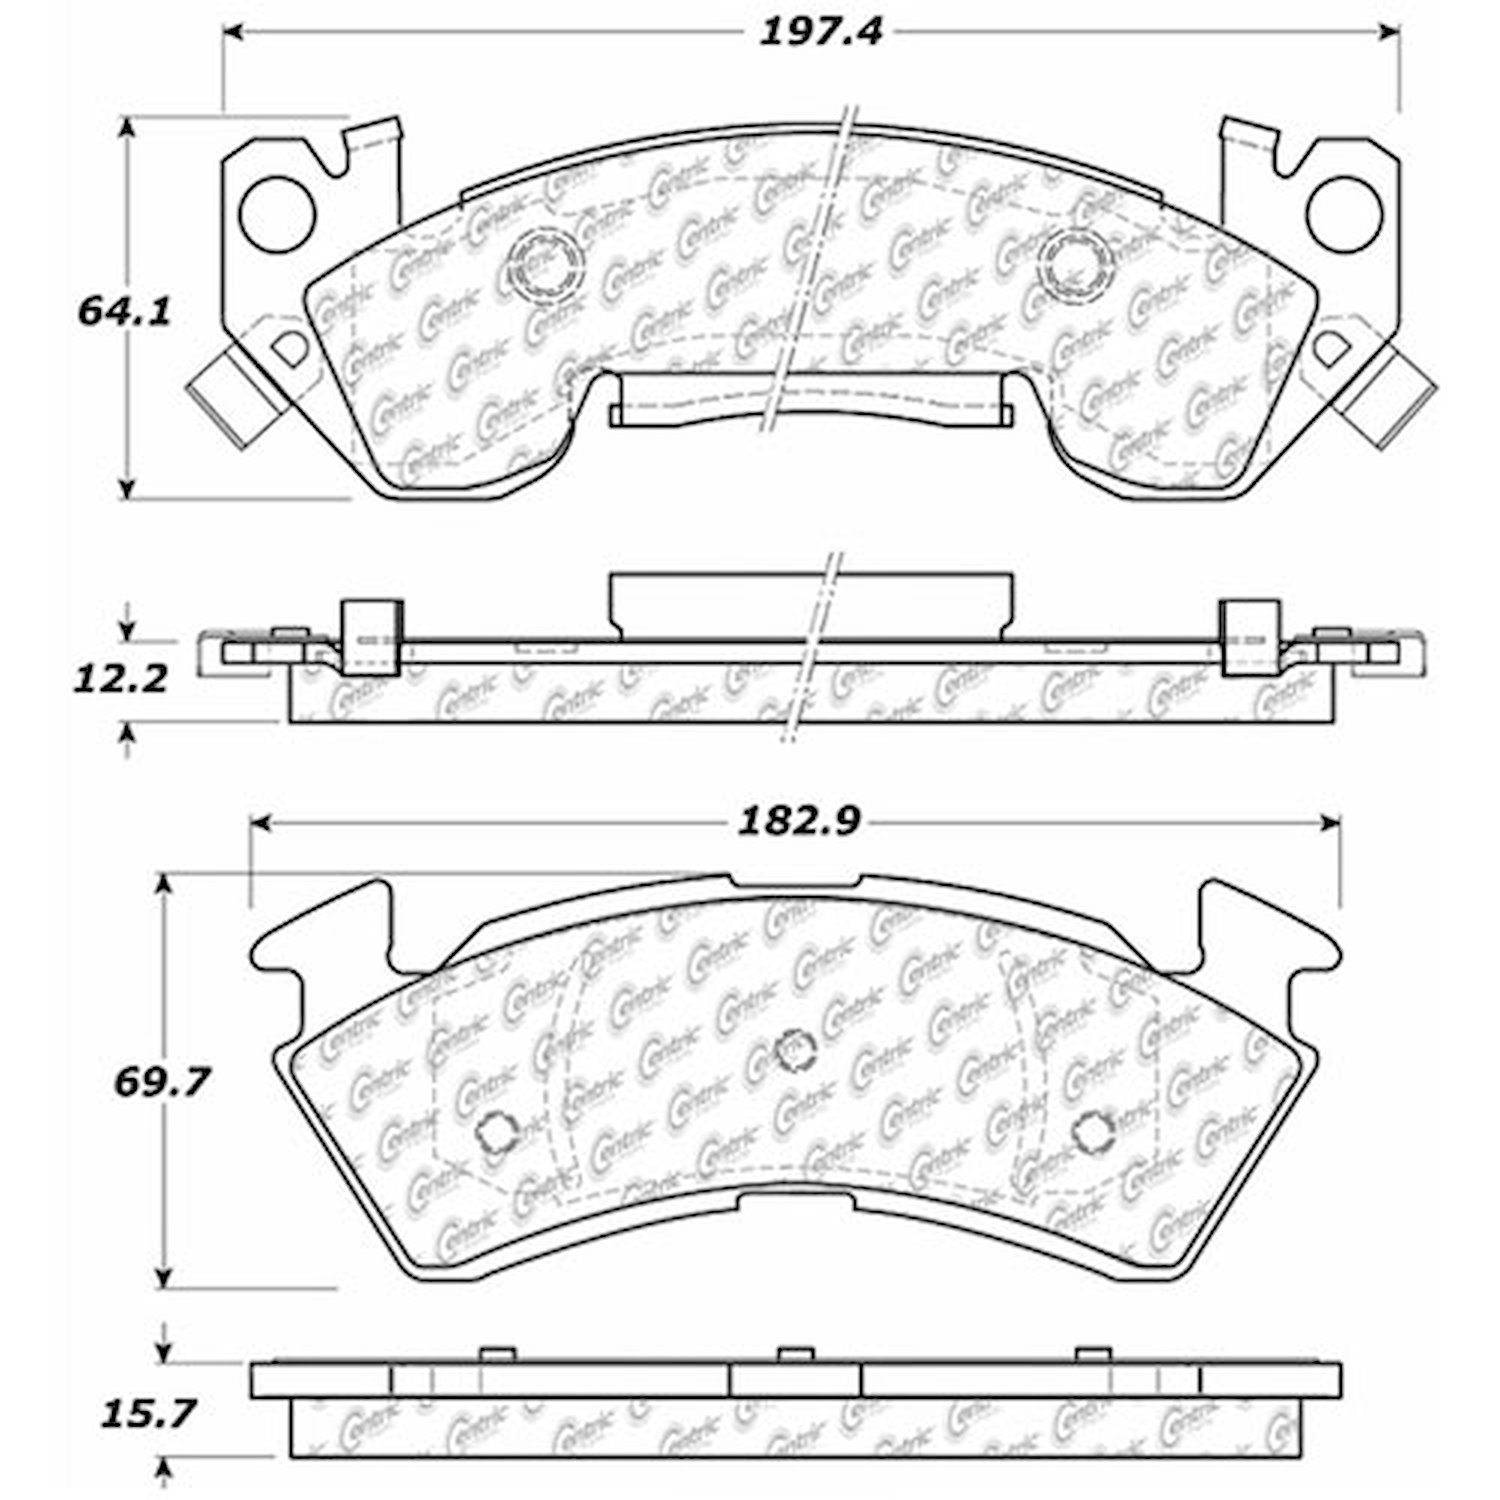 PosiQuiet Extended Wear 1990-1996 Buick Chevrolet Caprice Commercial Chassis Impala Roadmaster